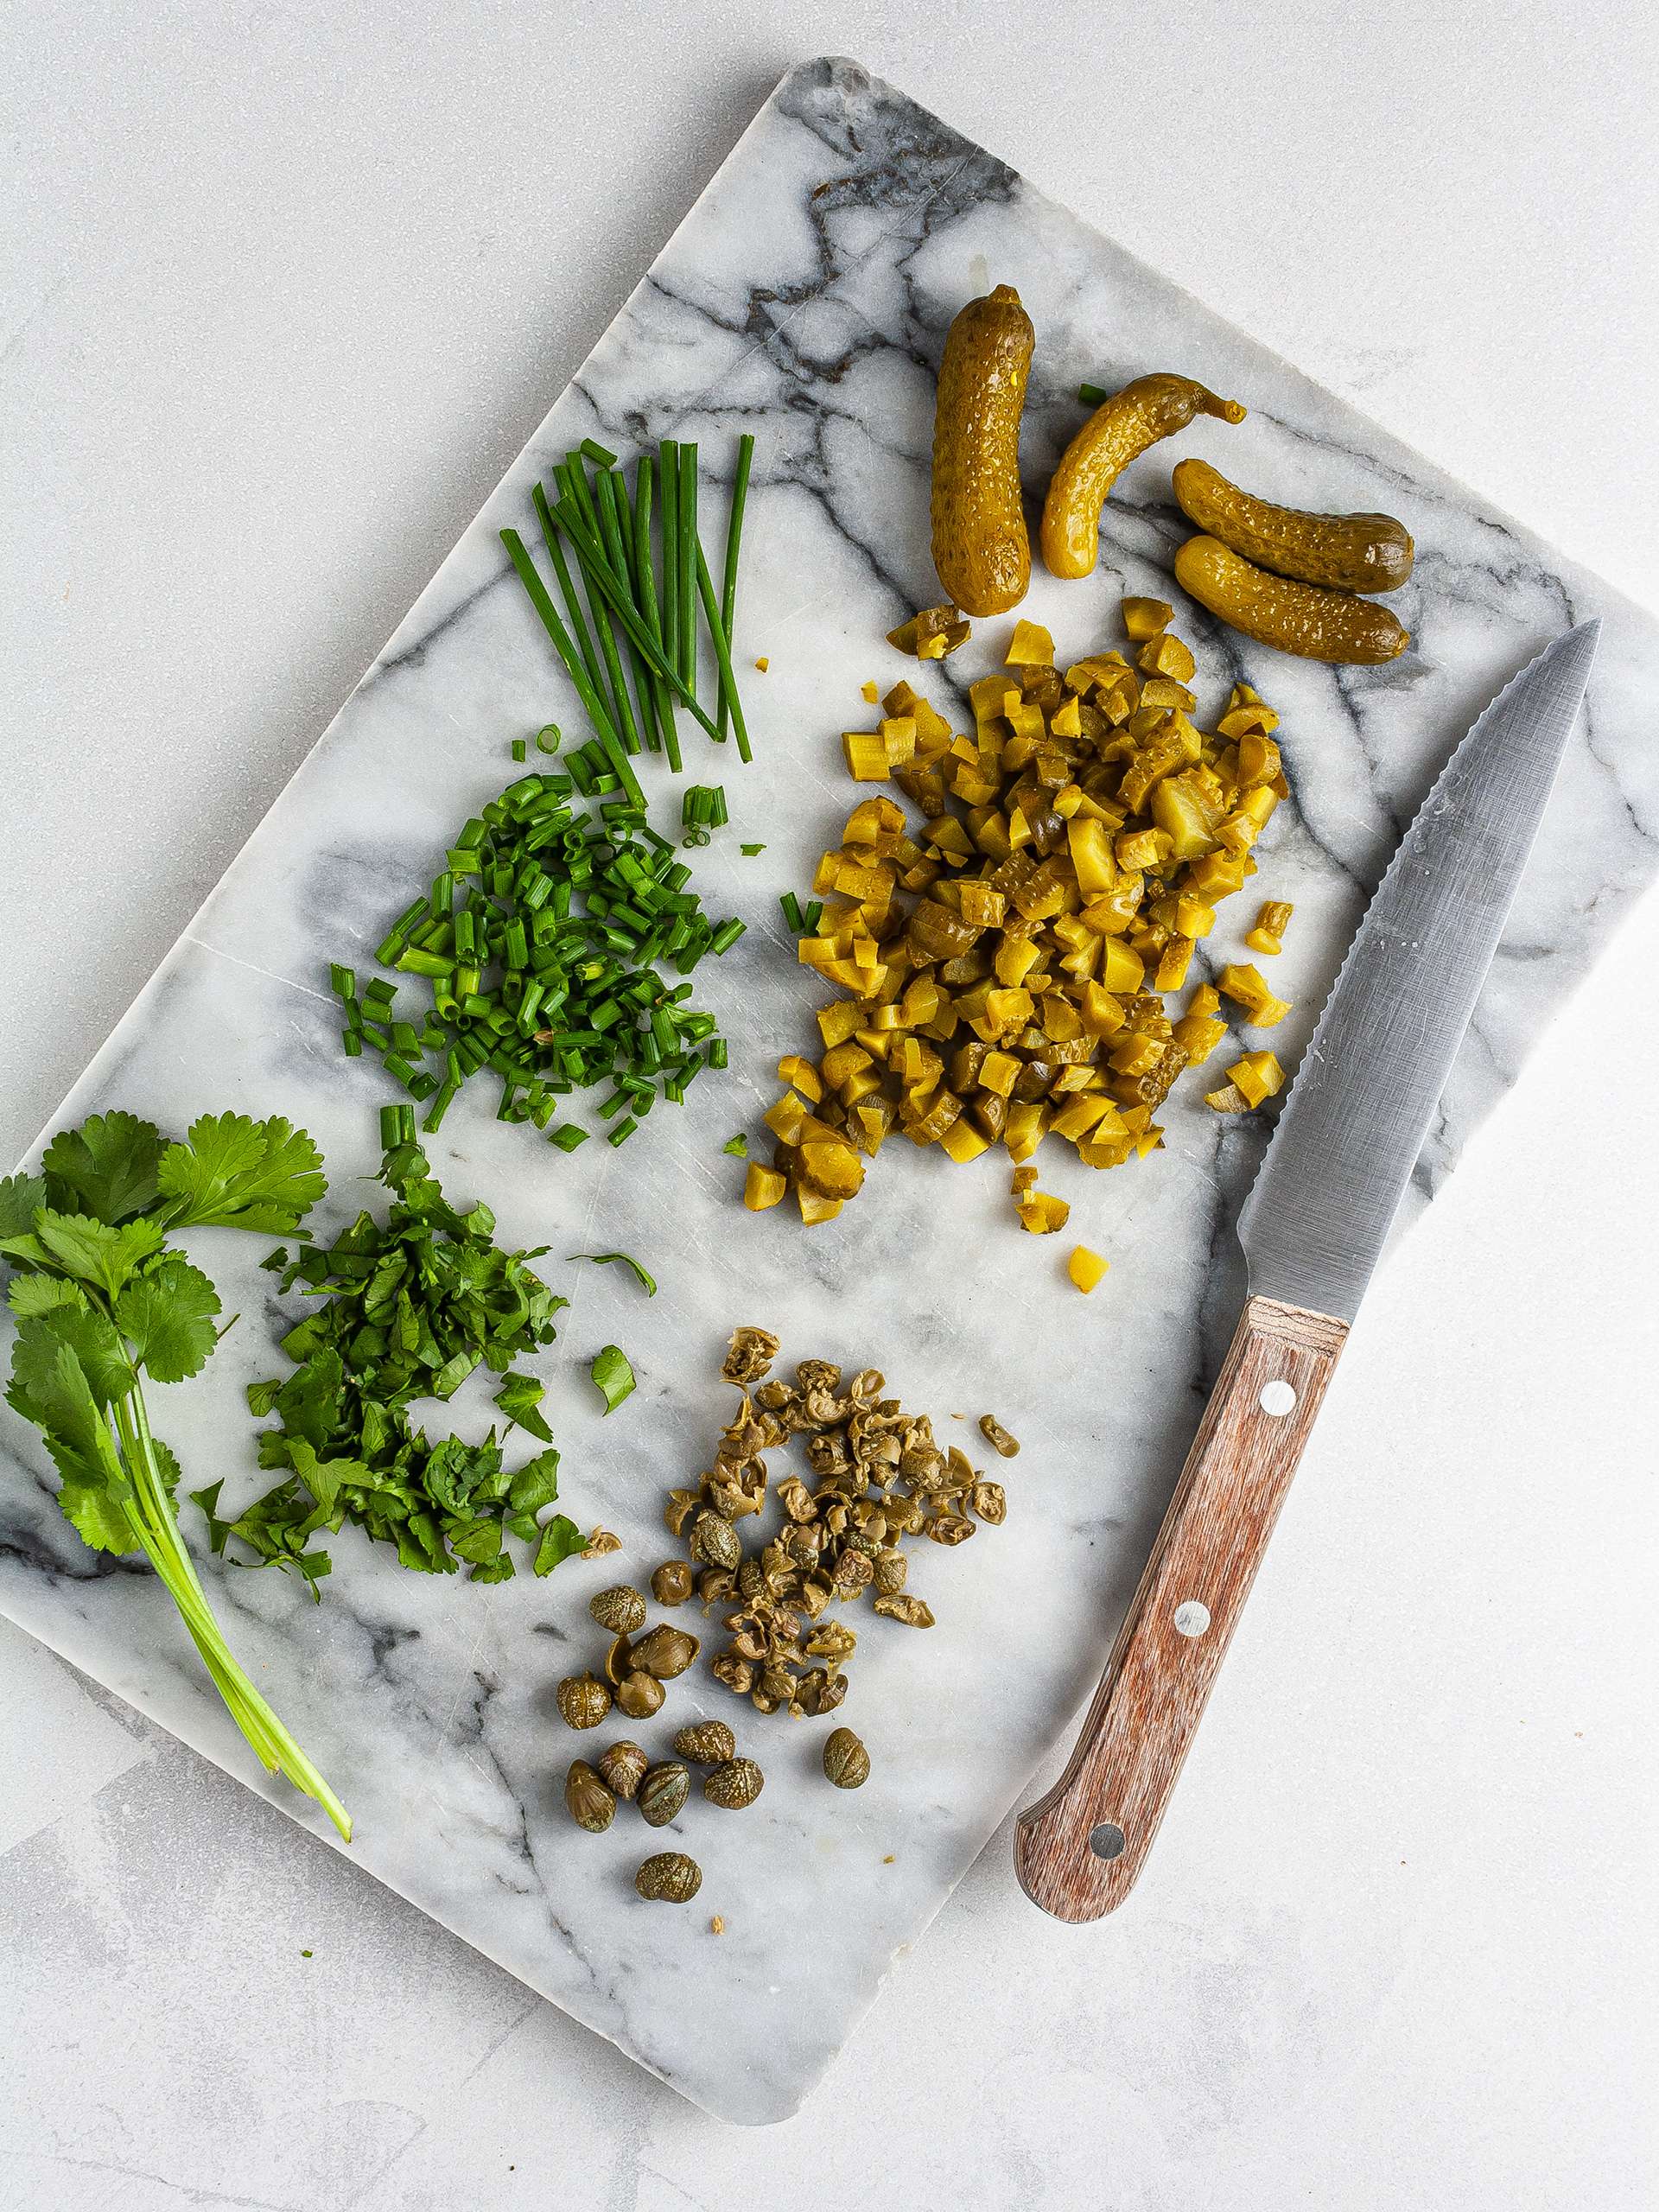 Chopped capers, gherkins and herbs